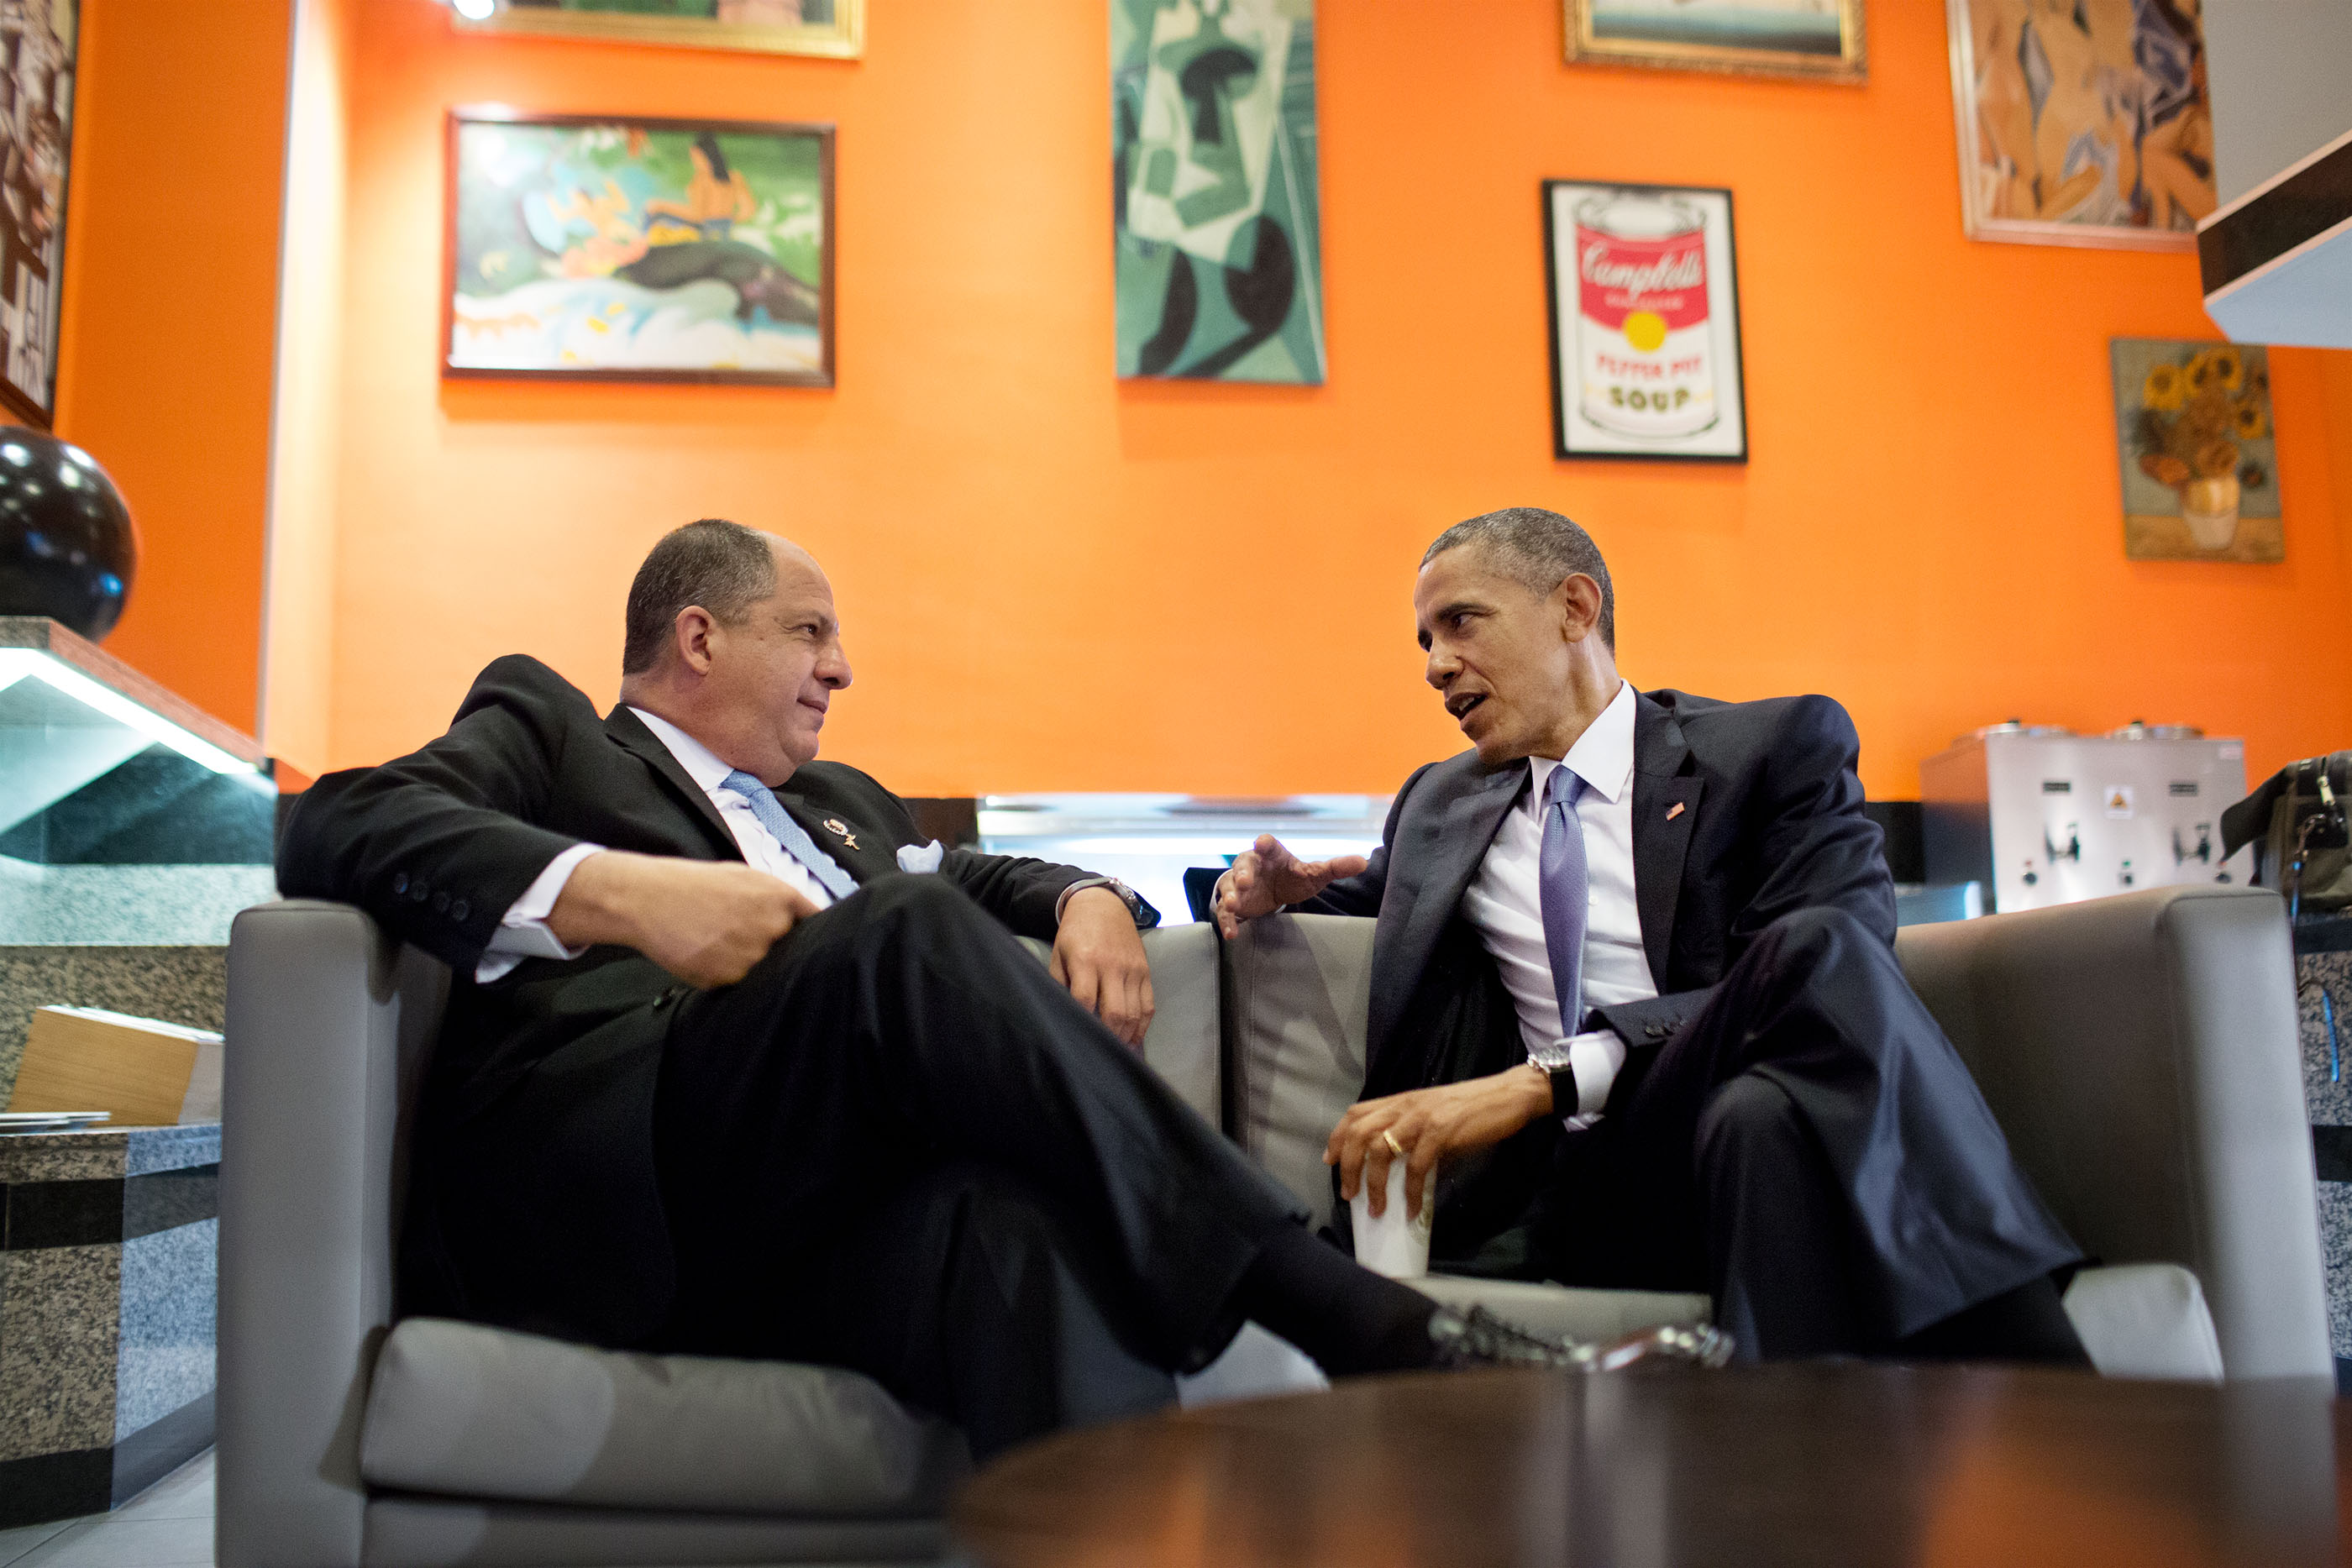 President Obama meets with Luis Guillermo Solís, President of Costa Rica. (Official White House Photo by Pete Souza)